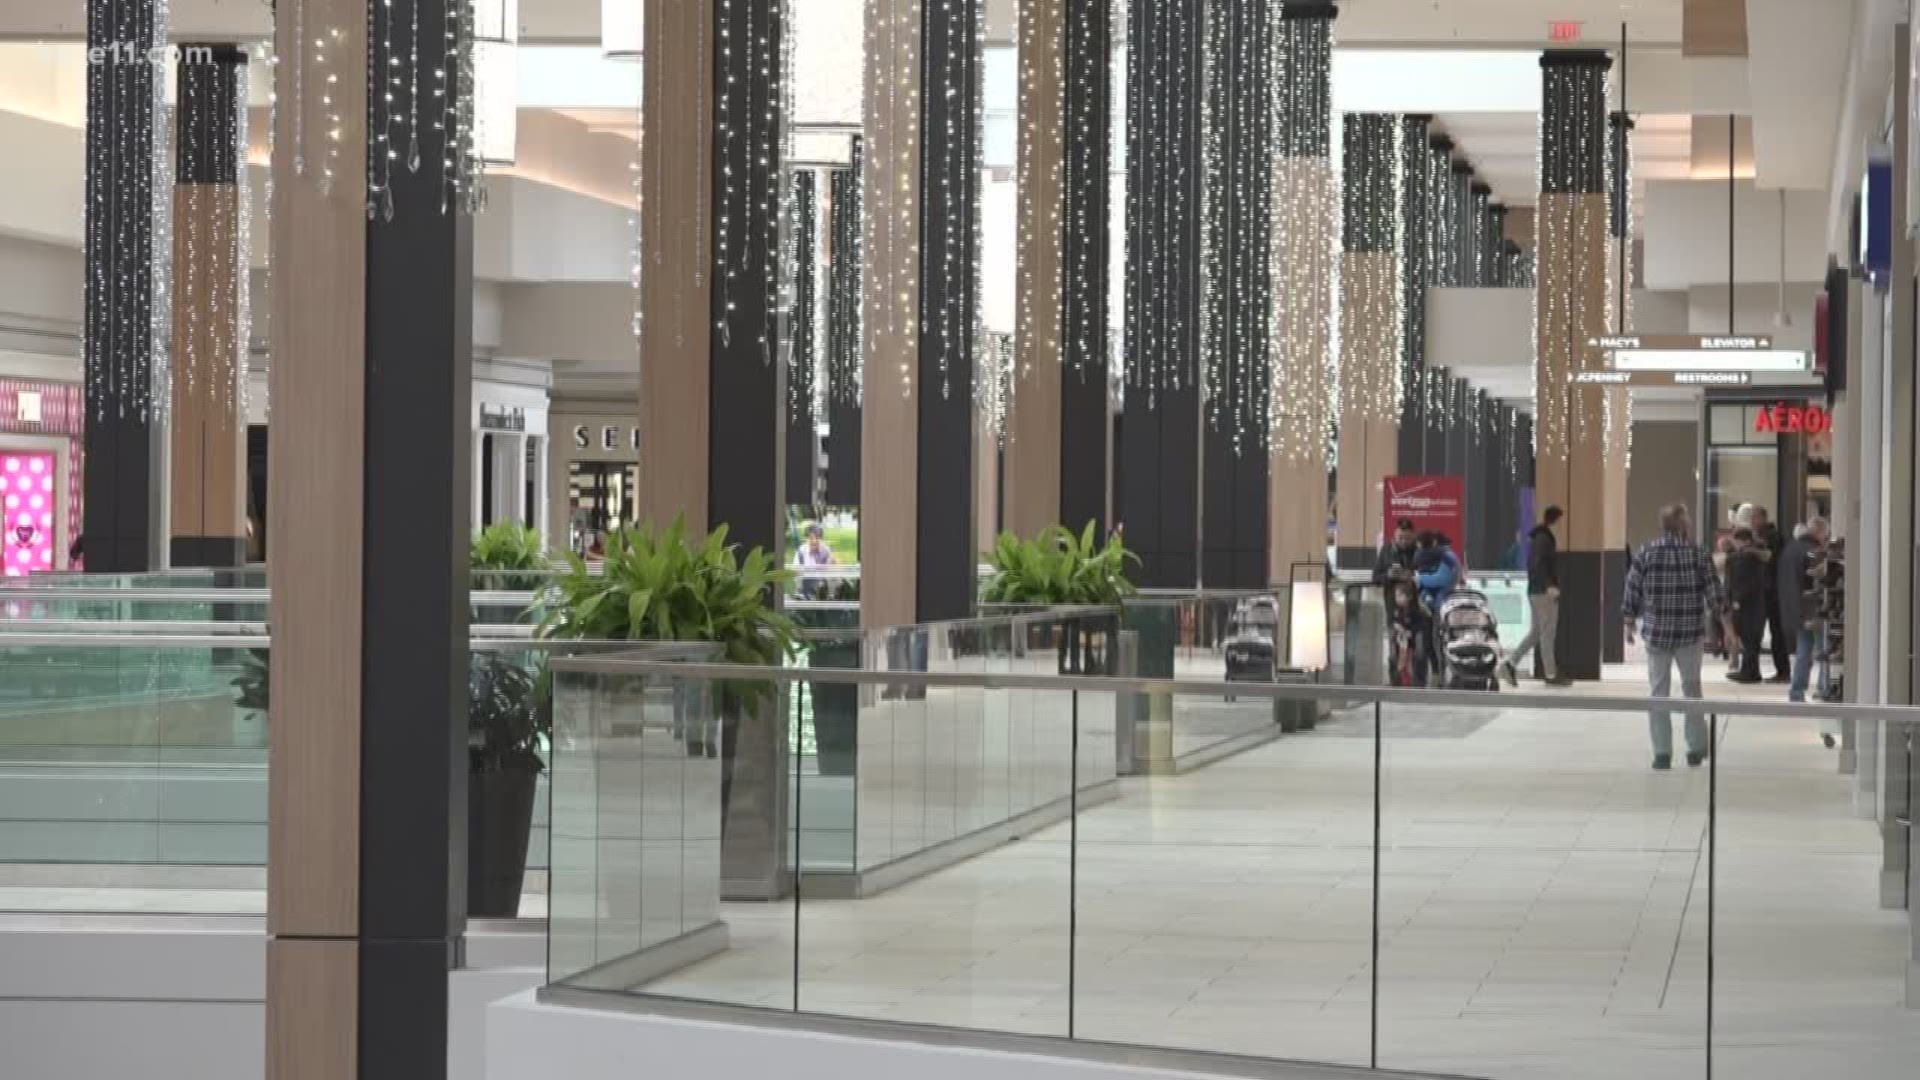 Across the country, malls are dying. But not in the Twin Cities metro. KARE 11's Ellery McCardle explains why that is: https://kare11.tv/2BhzGtM